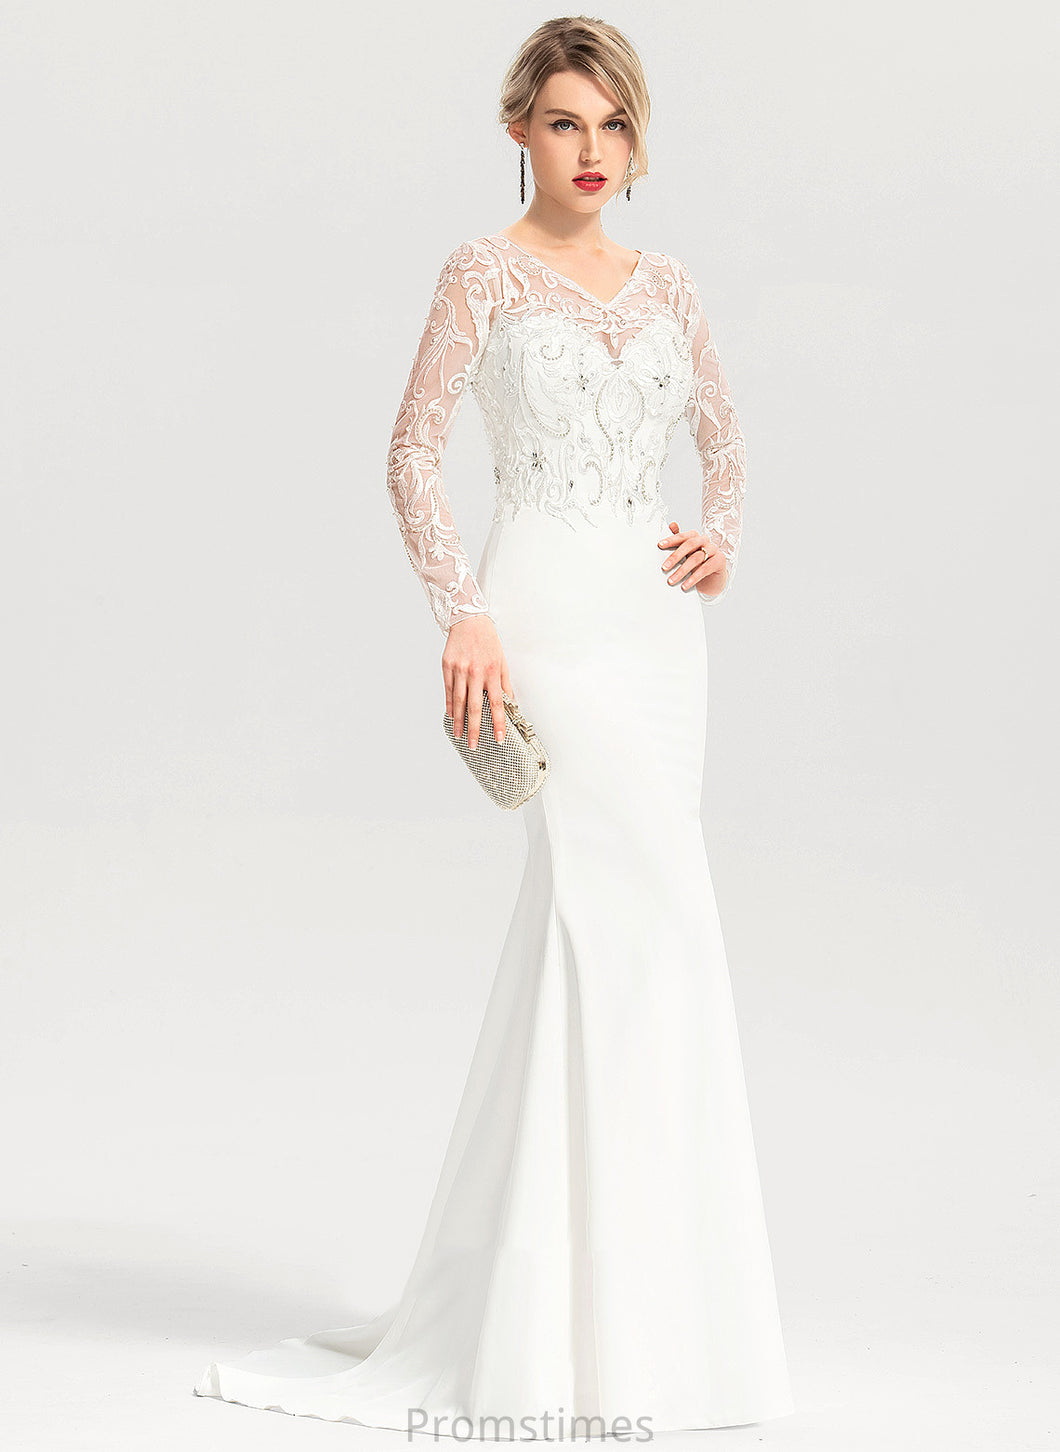 Wedding Stretch With Beading Trumpet/Mermaid Wedding Dresses Ali Dress Crepe Train Sweep V-neck Sequins Lace